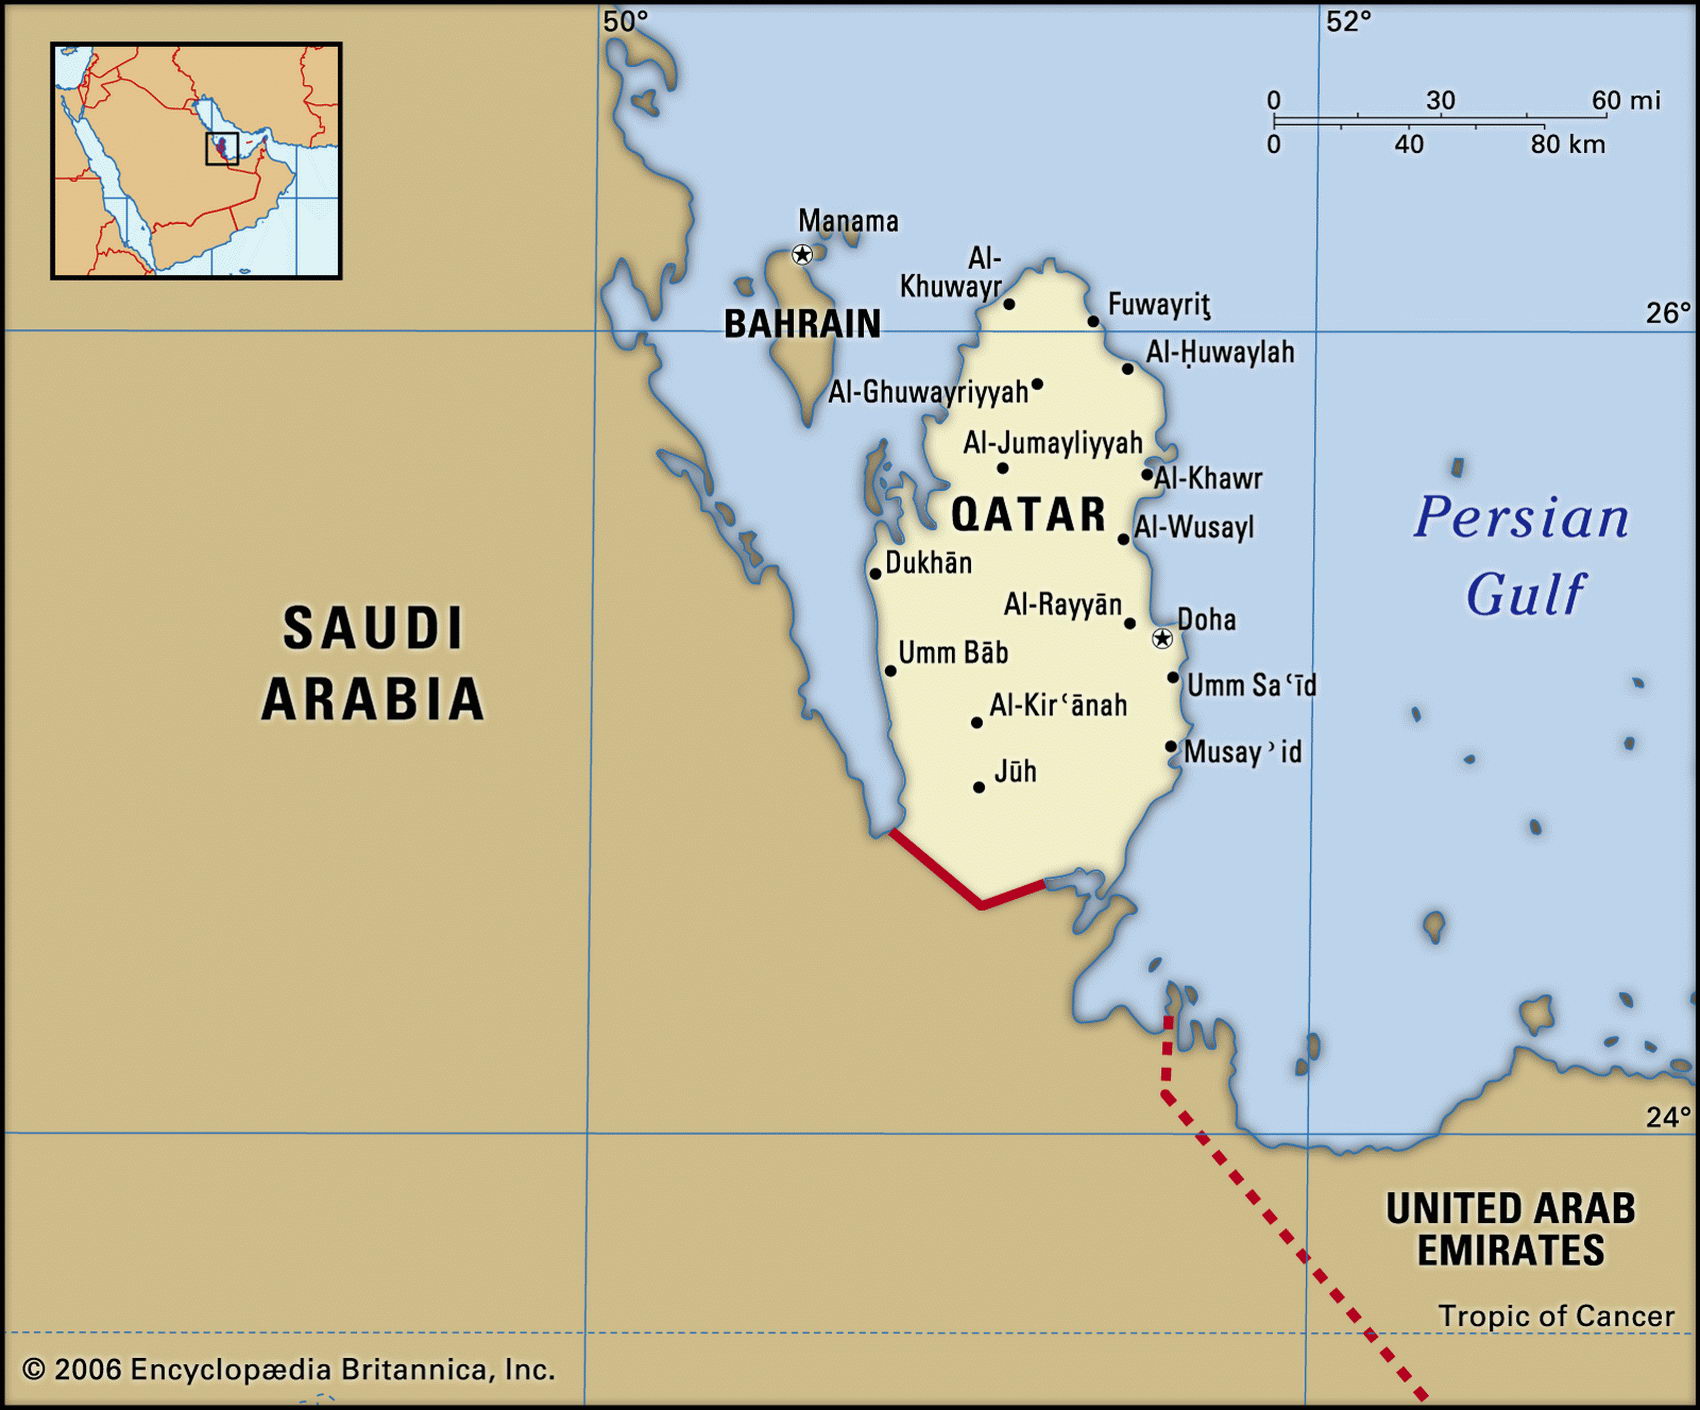 Qatar Zone Map - Management And Leadership